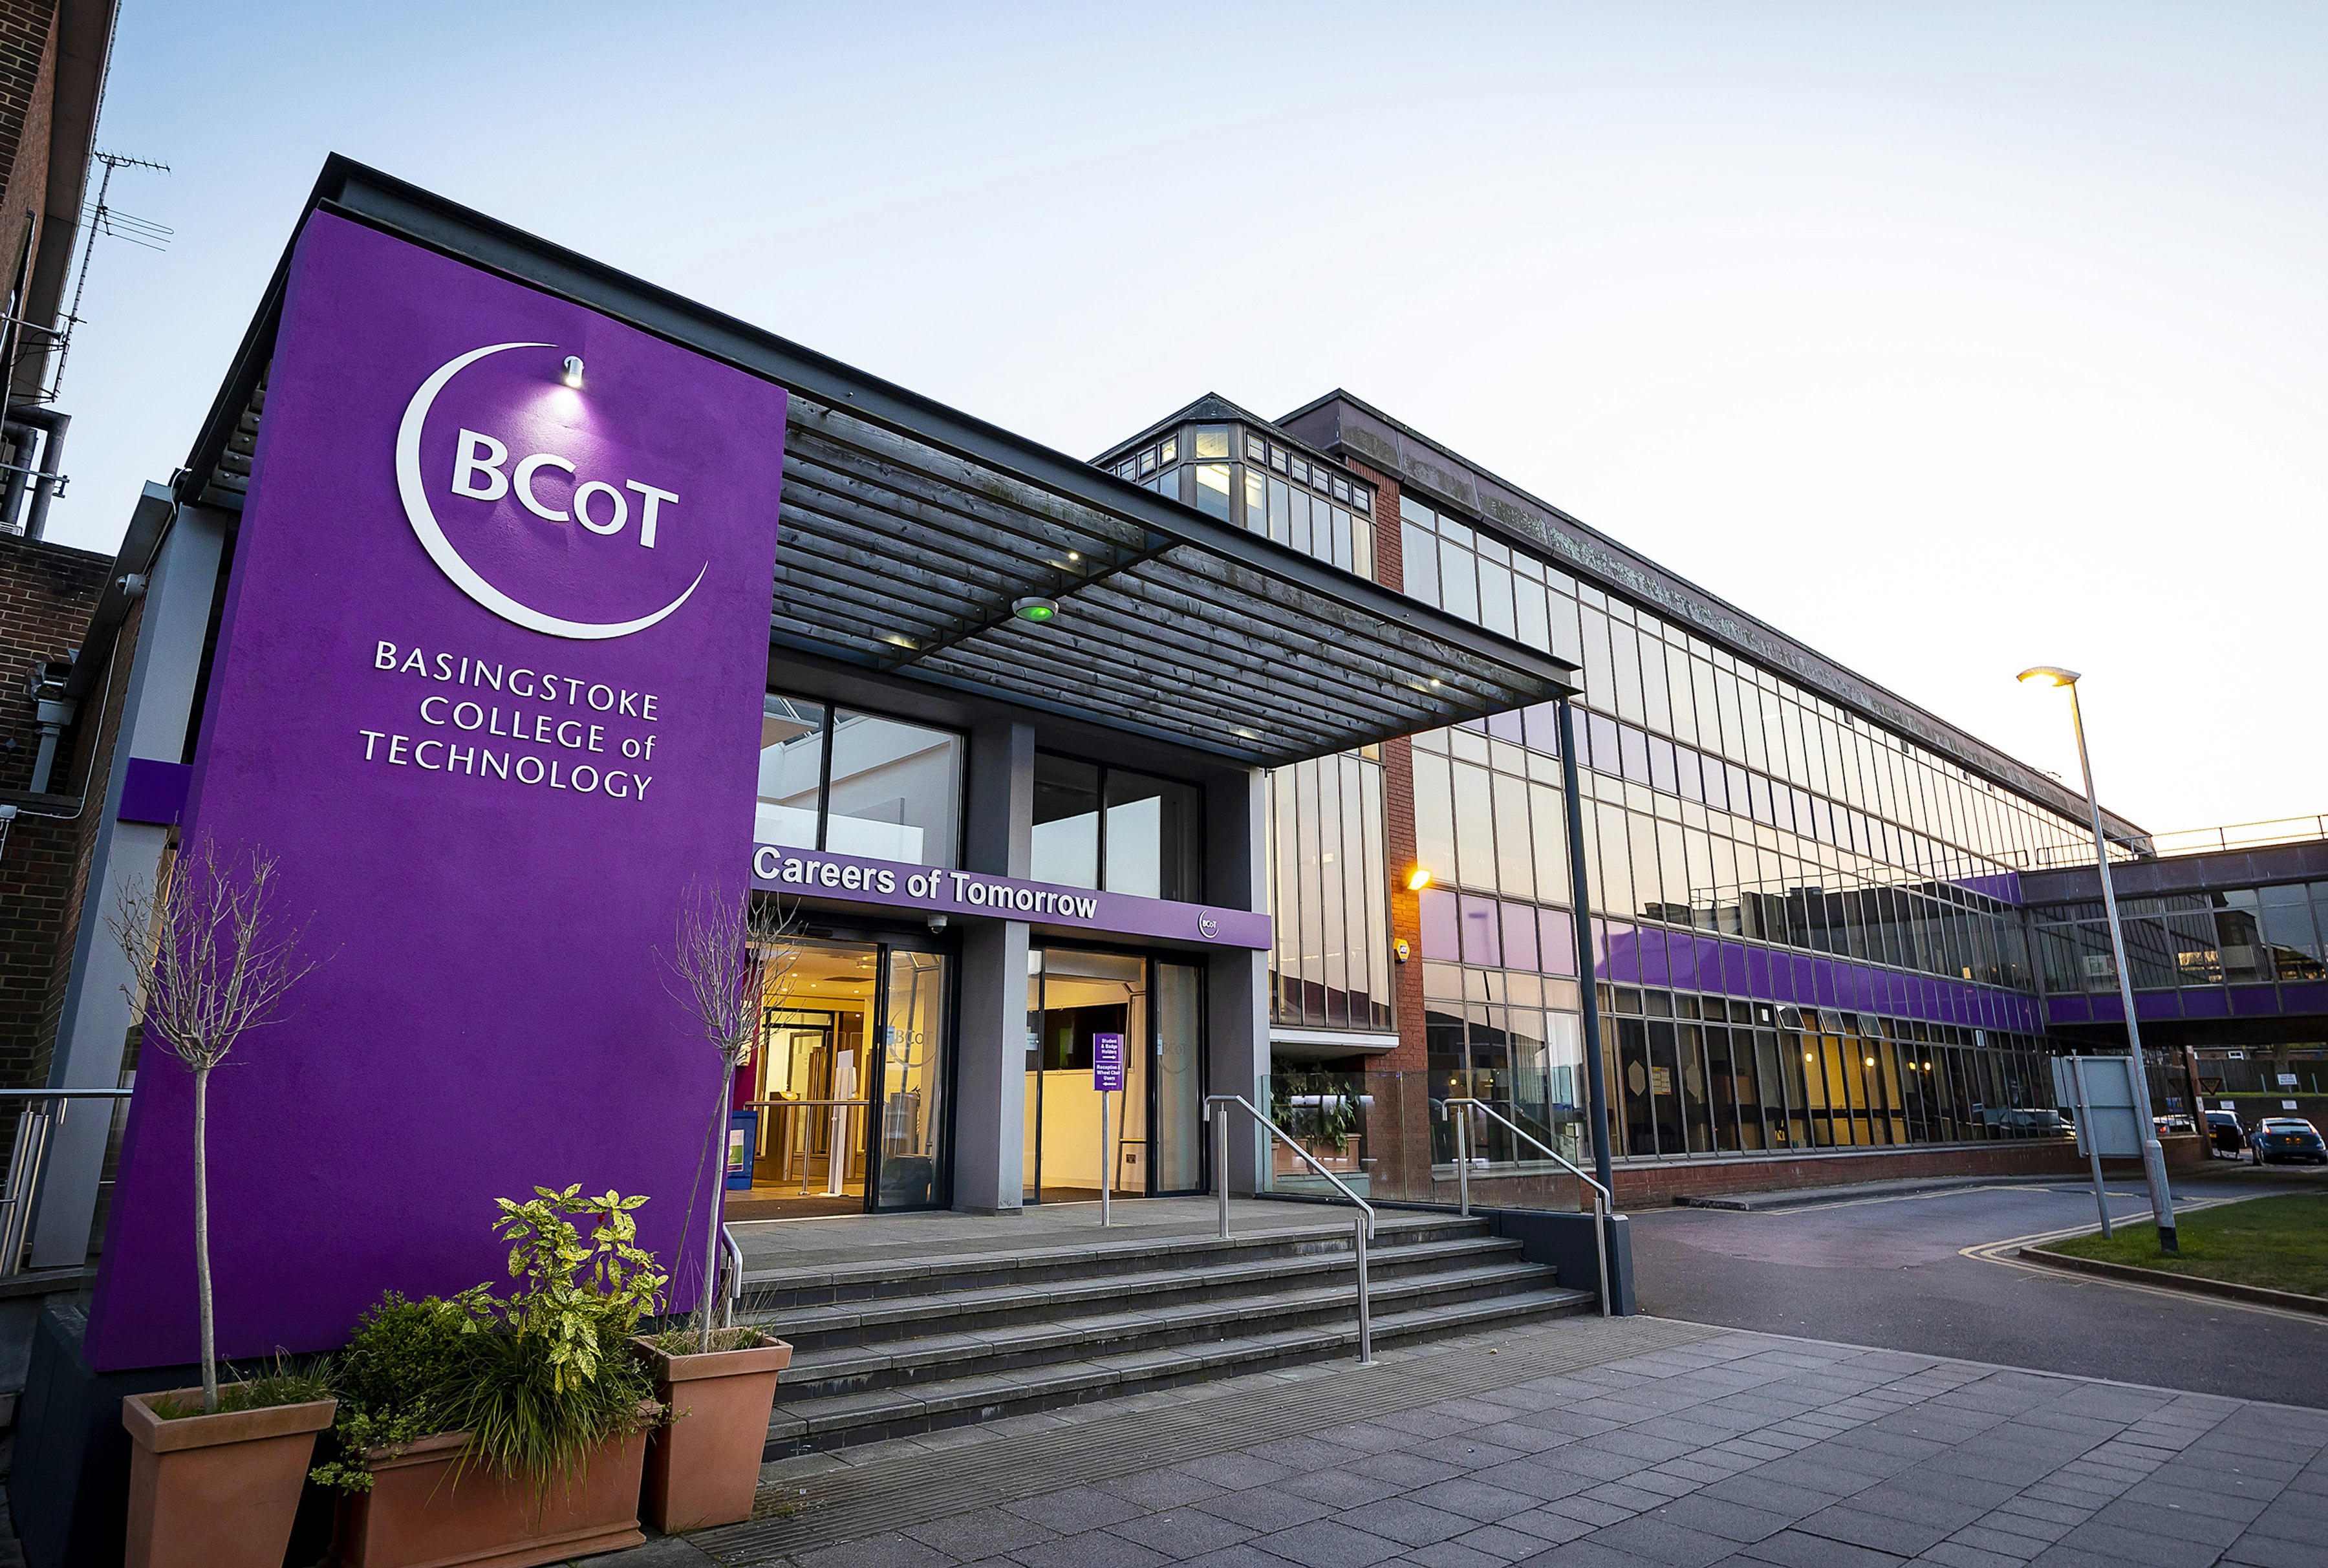 A building is pictured on a sunny day, to the left hand side of the image a purple column reads BCoT Basingstoke College of Technology in white text.